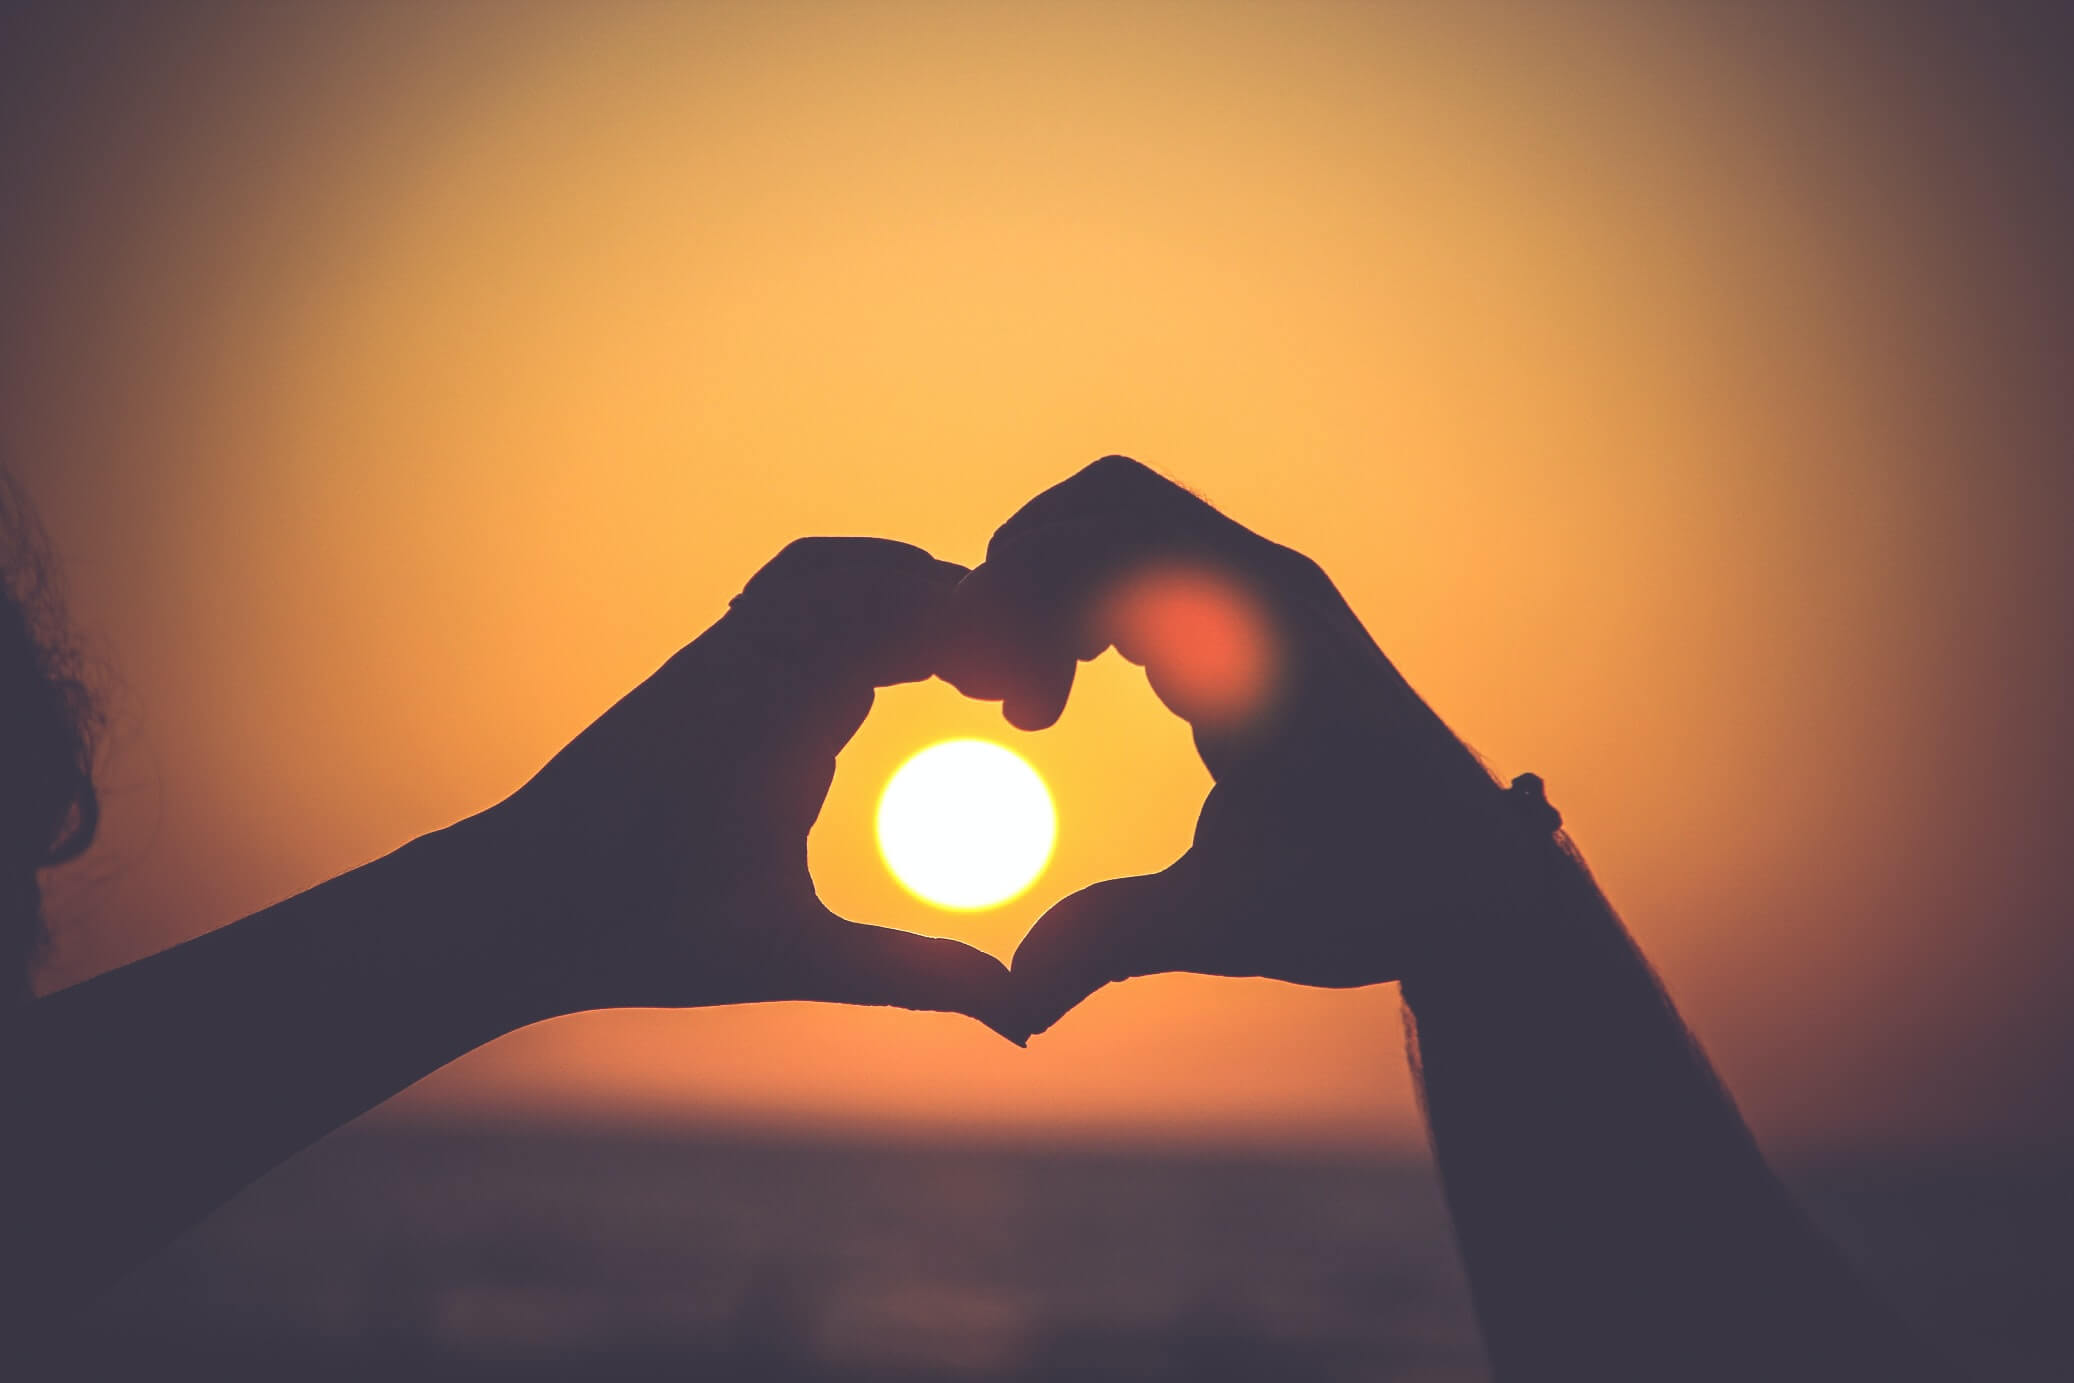 Image of two hands creating a heart shape at a sunset